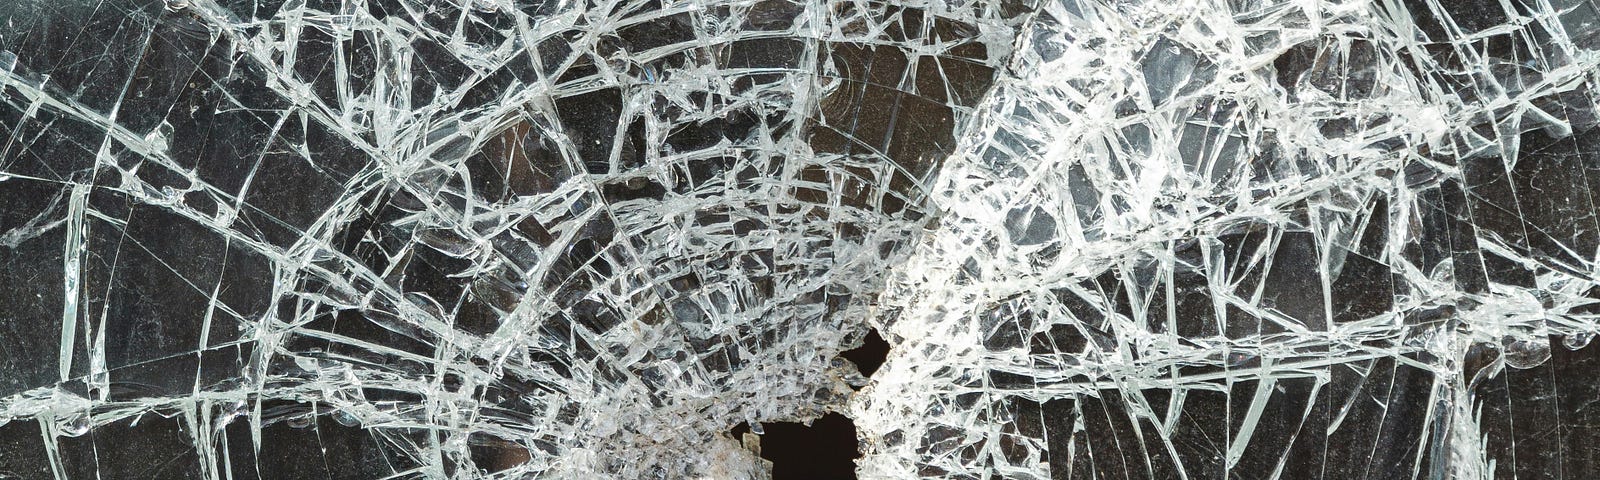 Shattered glass with two holes.